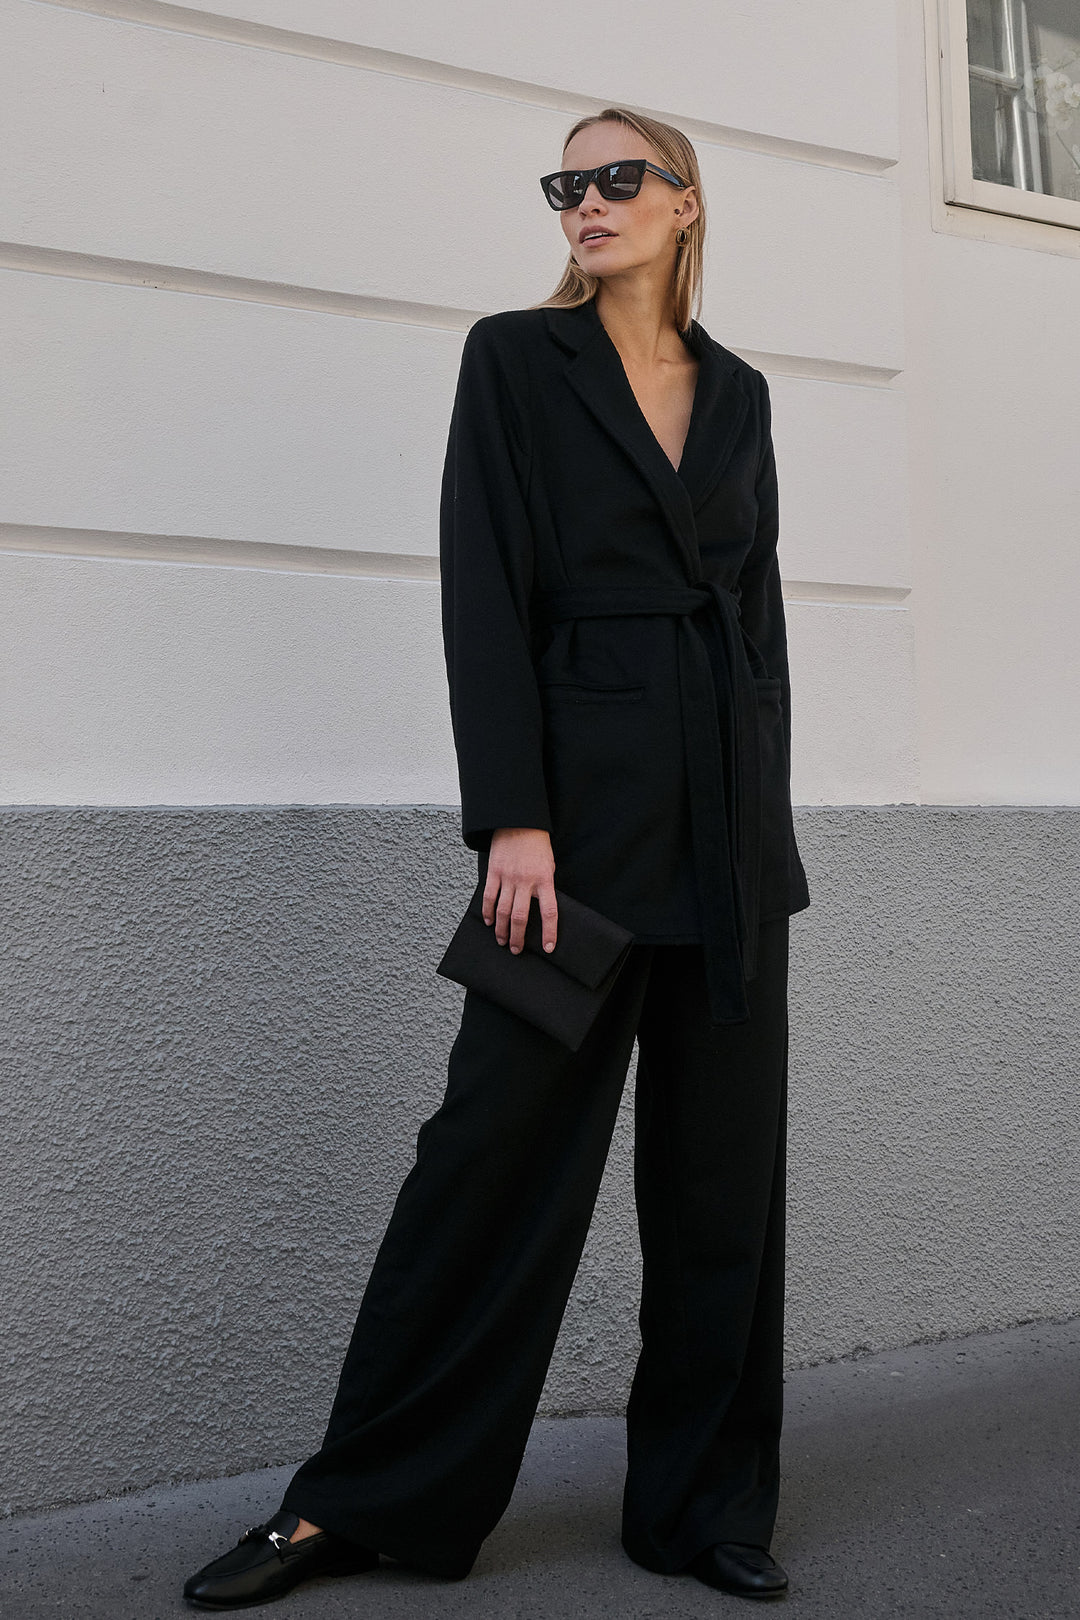 Mila.Vert Styling Tips: Smart Wide-Leg Trousers Styled for Autumn